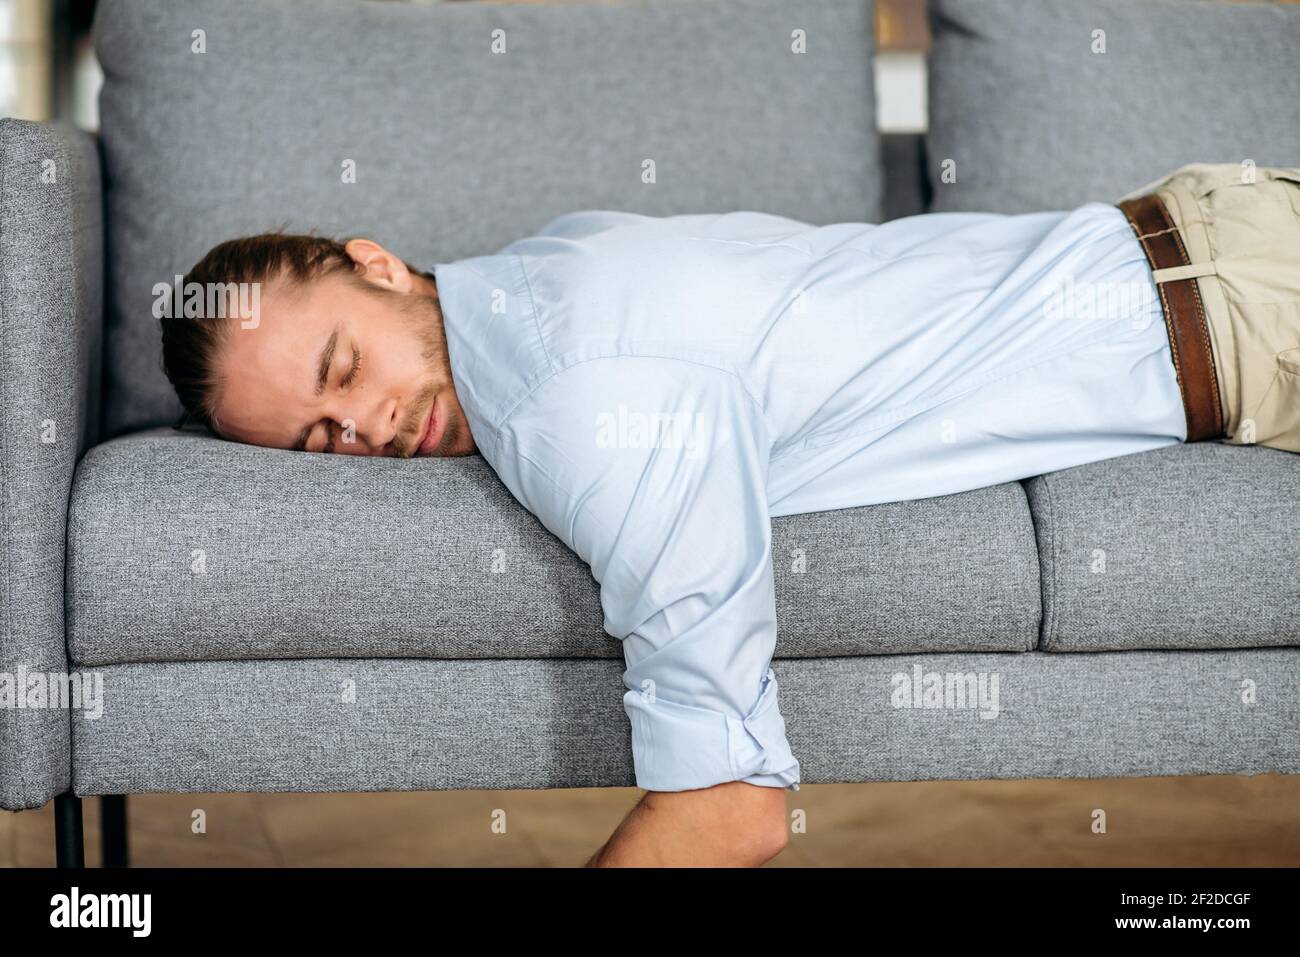 Exhausted tired guy, businessman or student dressed in formal clothes, lying on the couch, tired of work or study, collapsed from fatigue, at home in the living room, need a rest or vacation Stock Photo